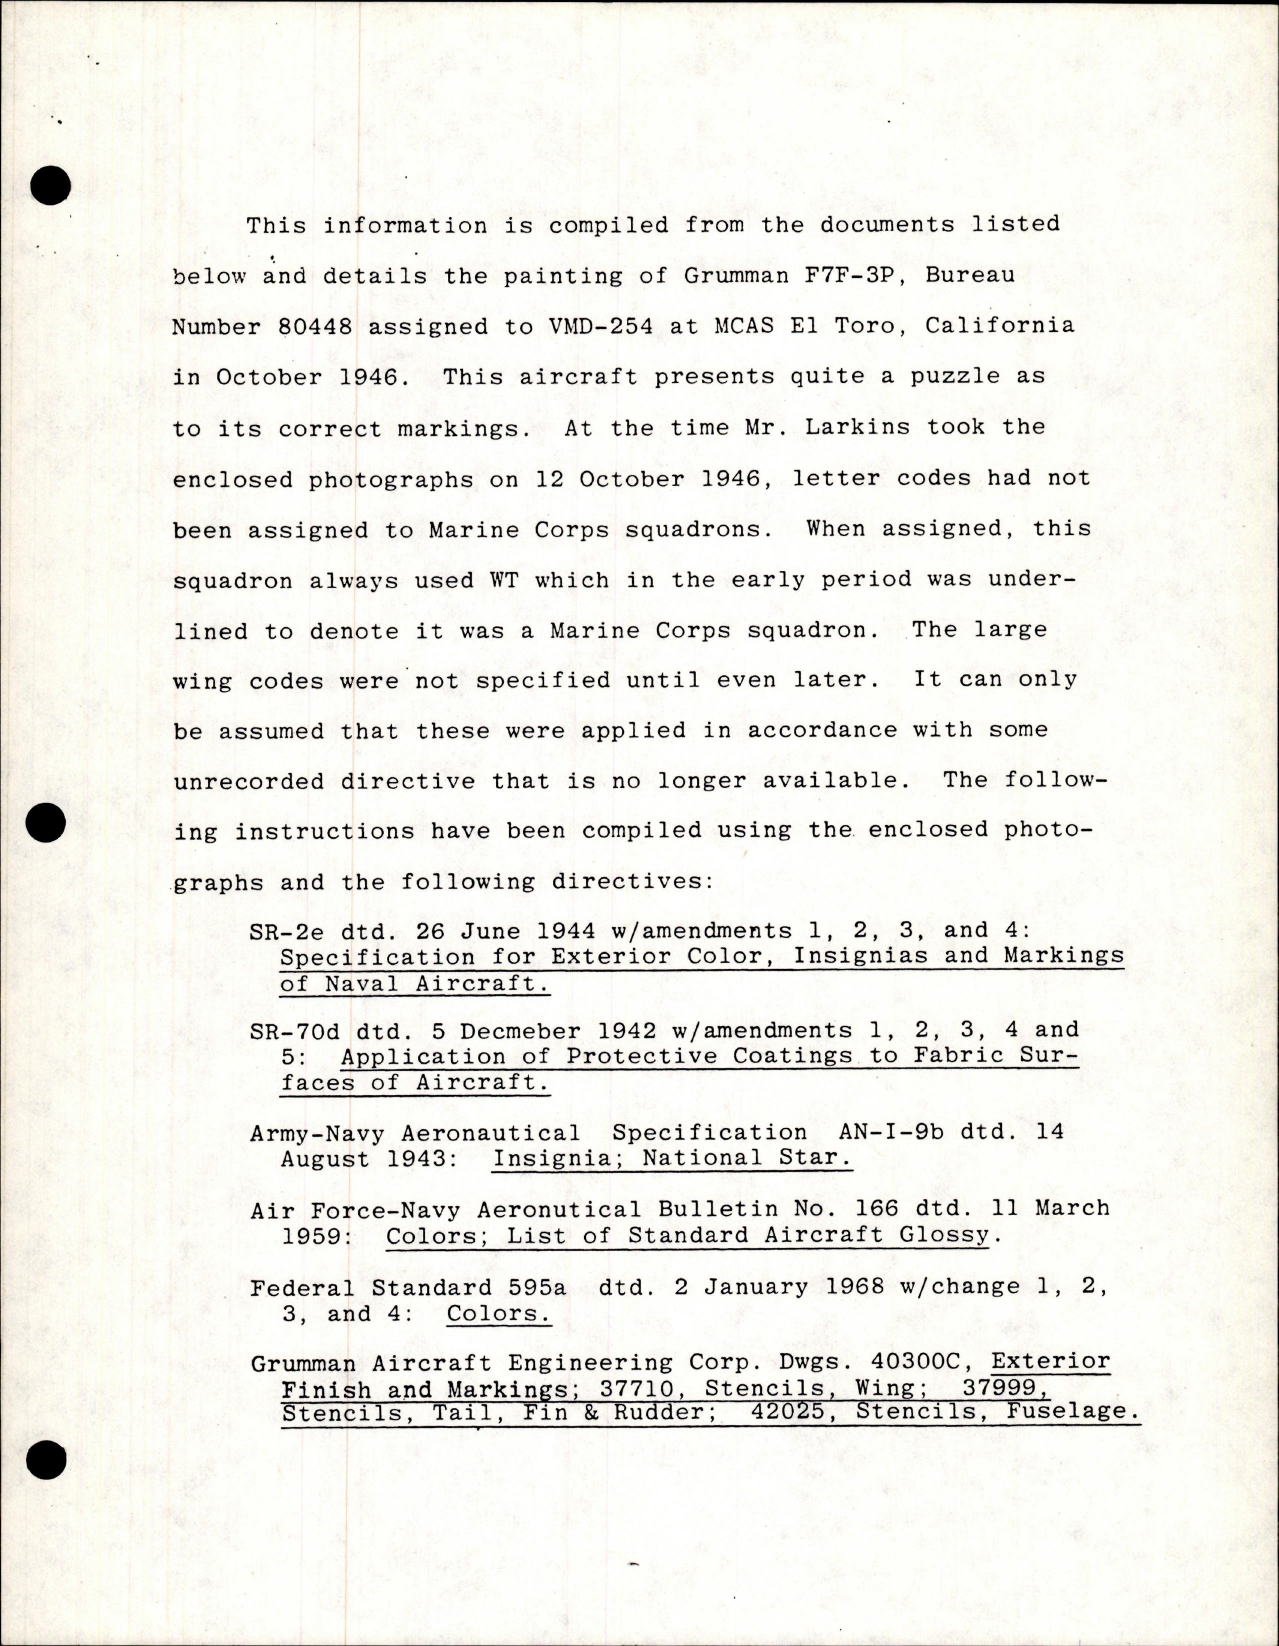 Sample page 9 from AirCorps Library document: Painting and Insignia for F7F-3P - Serial No. 80448